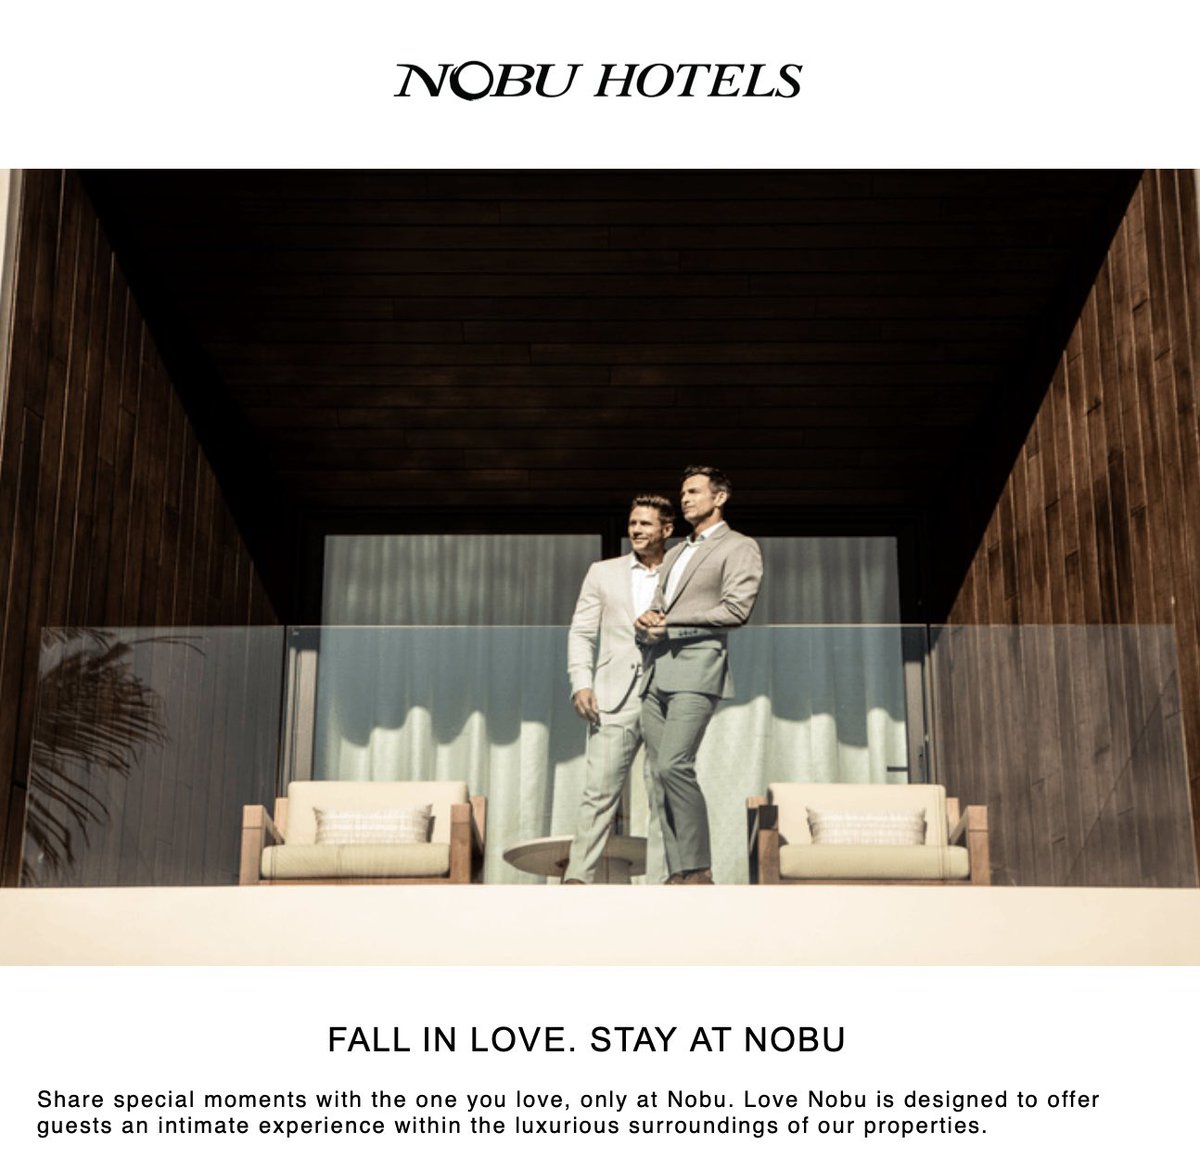 Good on you, @NobuHotels - so pleased to see an inclusive, #LGBTQ+ positive campaign for your Valentines Day newsletter! ❤️ #LoveIsLove #keepyourmindtravelling

#diversity #diversityandinclusion #inclusivetravel #woketravel